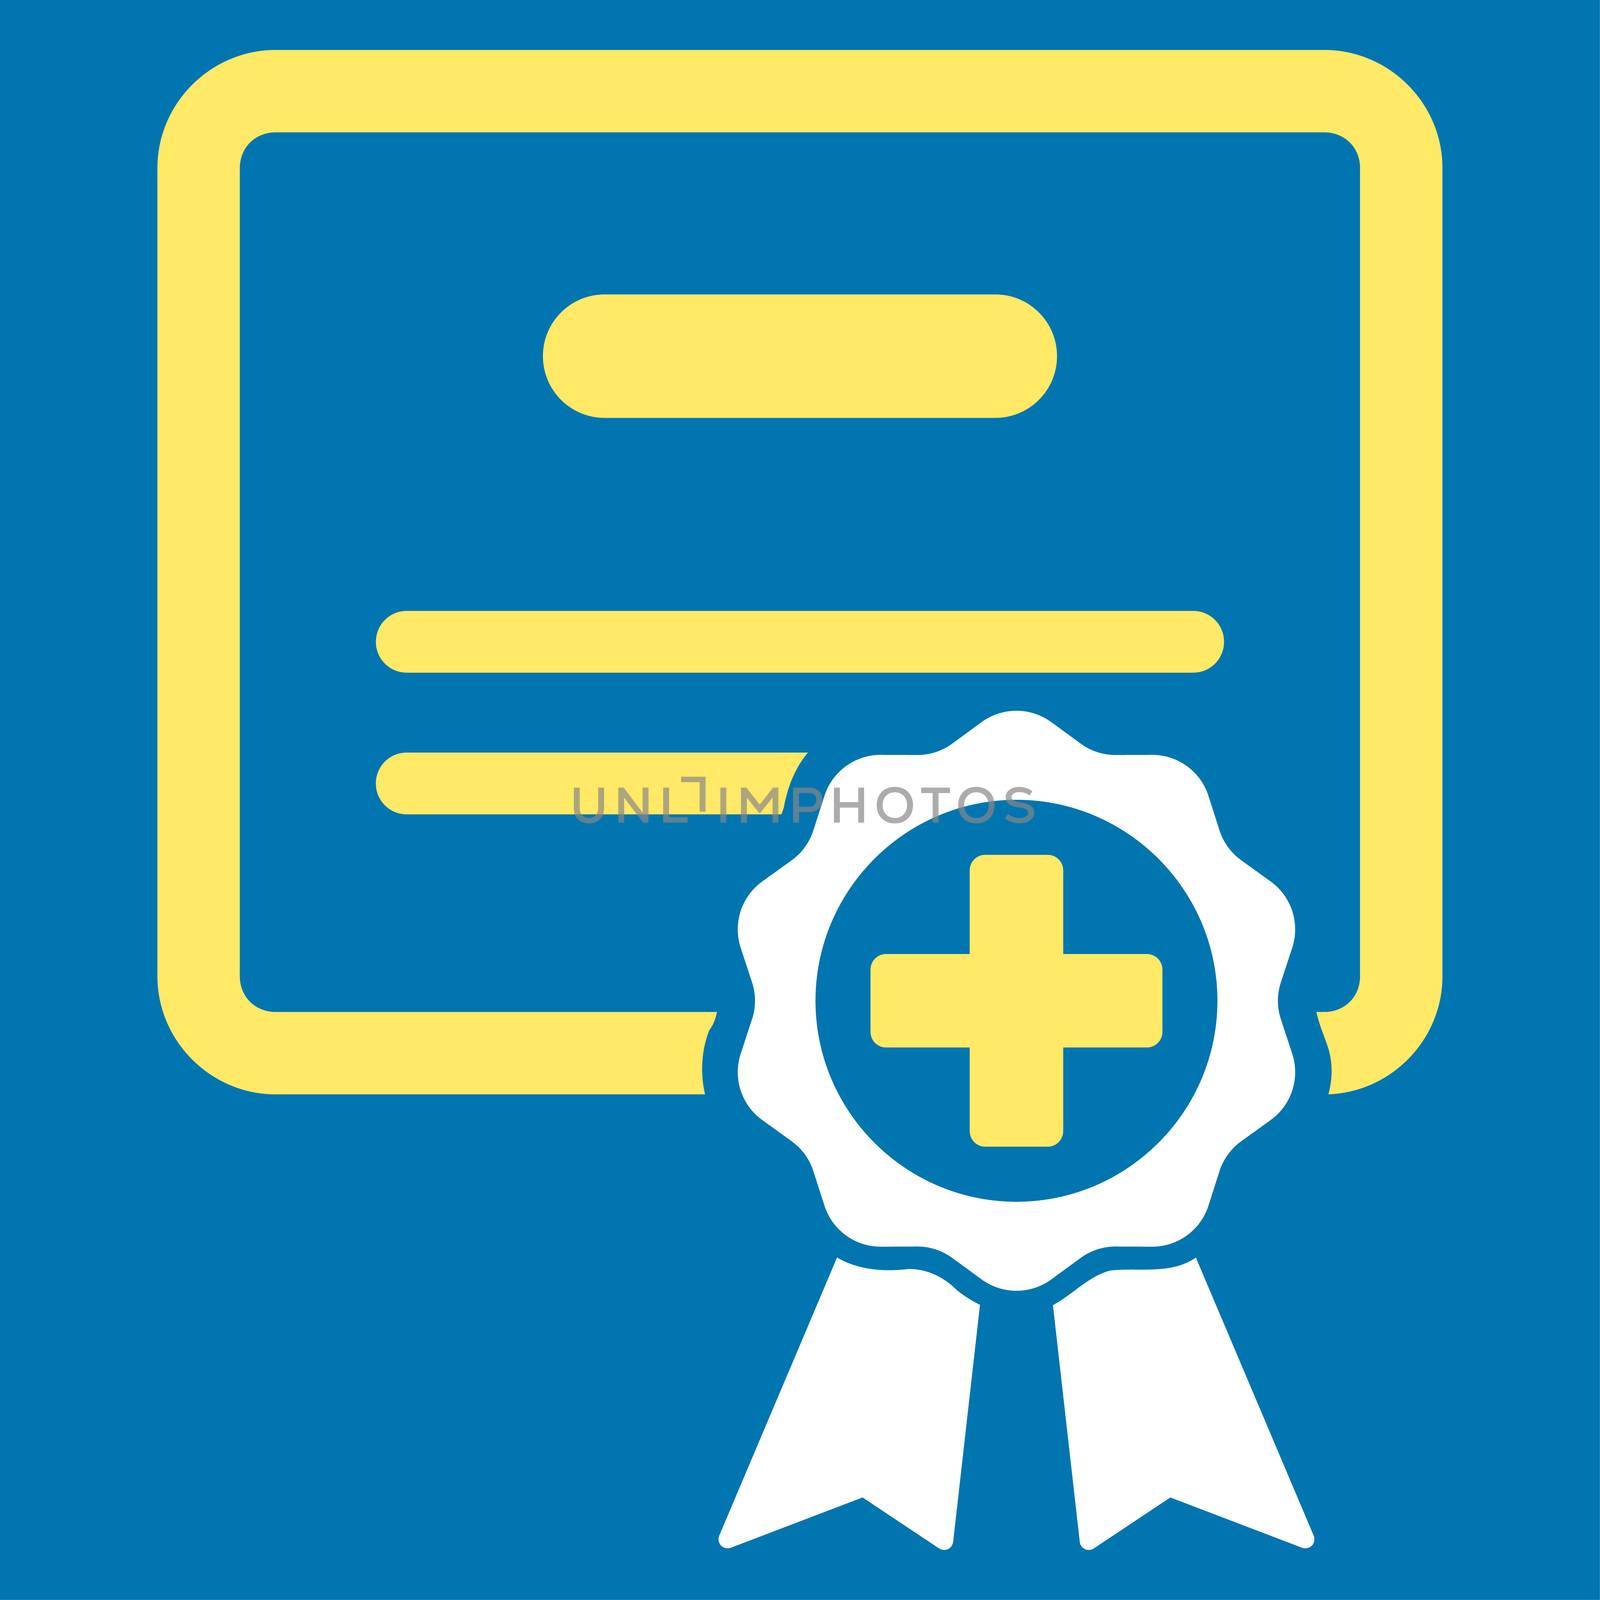 Medical Certificate raster icon. Style is bicolor flat symbol, yellow and white colors, rounded angles, blue background.